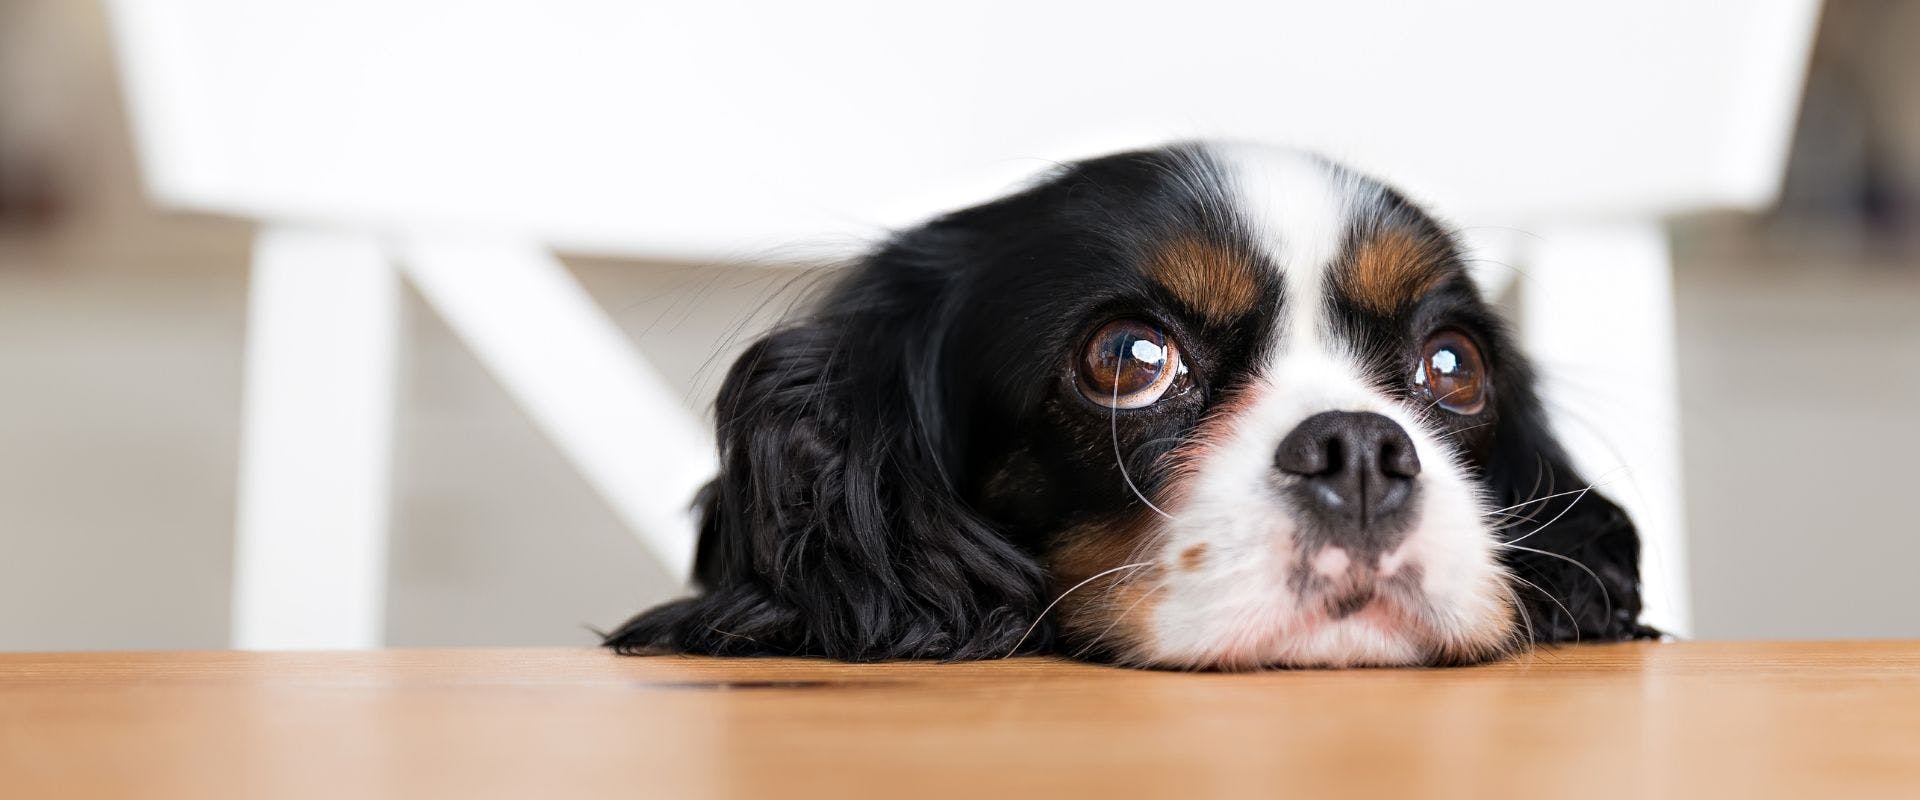 Cavalier King Charles Spaniel sitting at the table